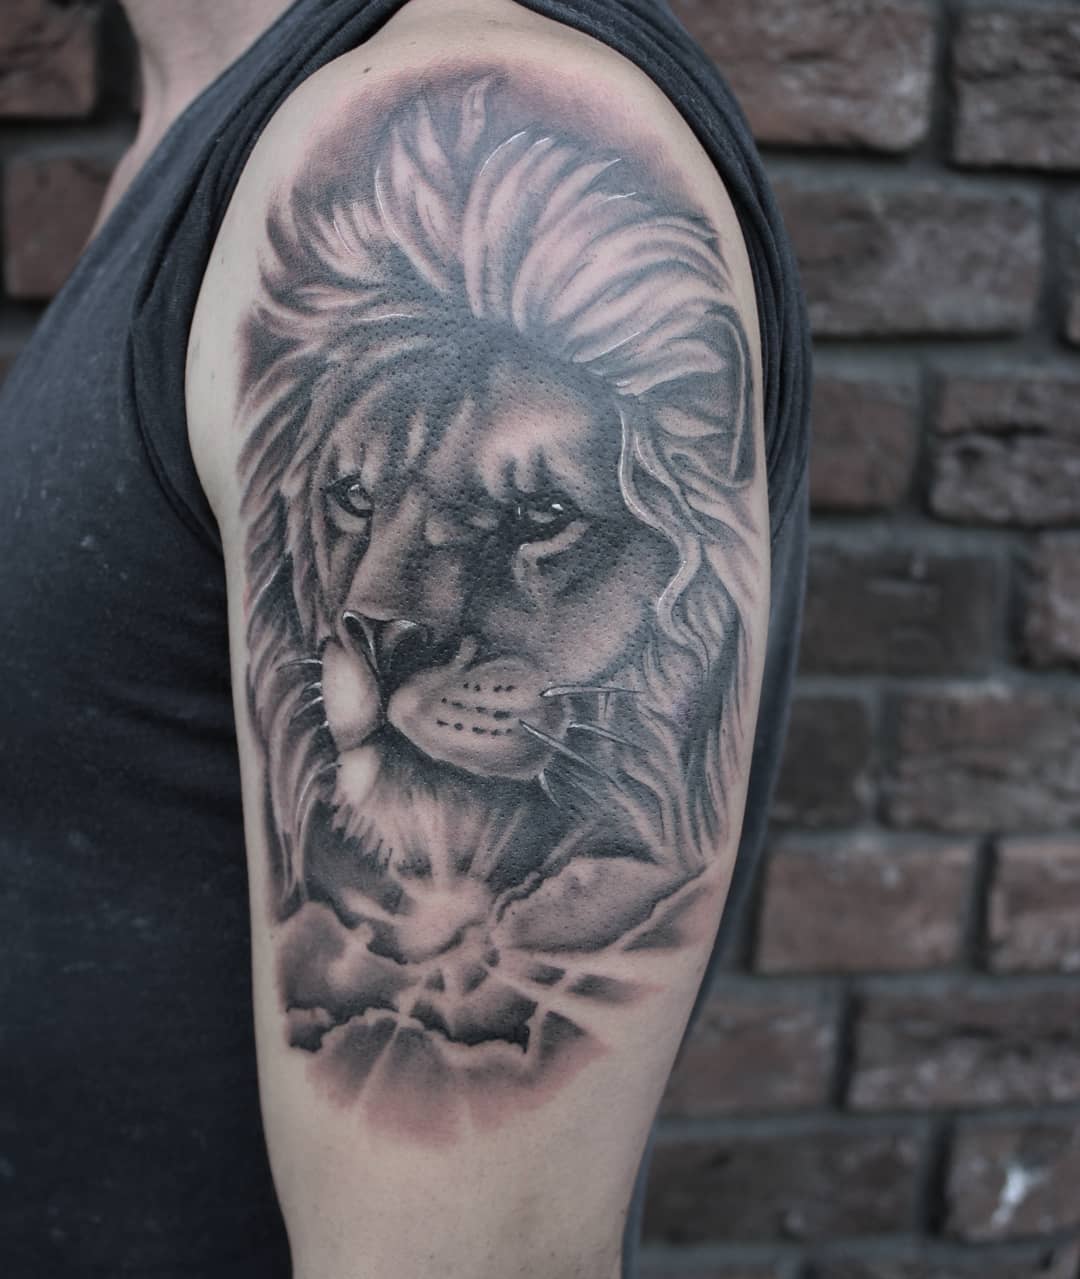 Fresh lion from a while back, thx to my client for the trust
#germantattooers #g